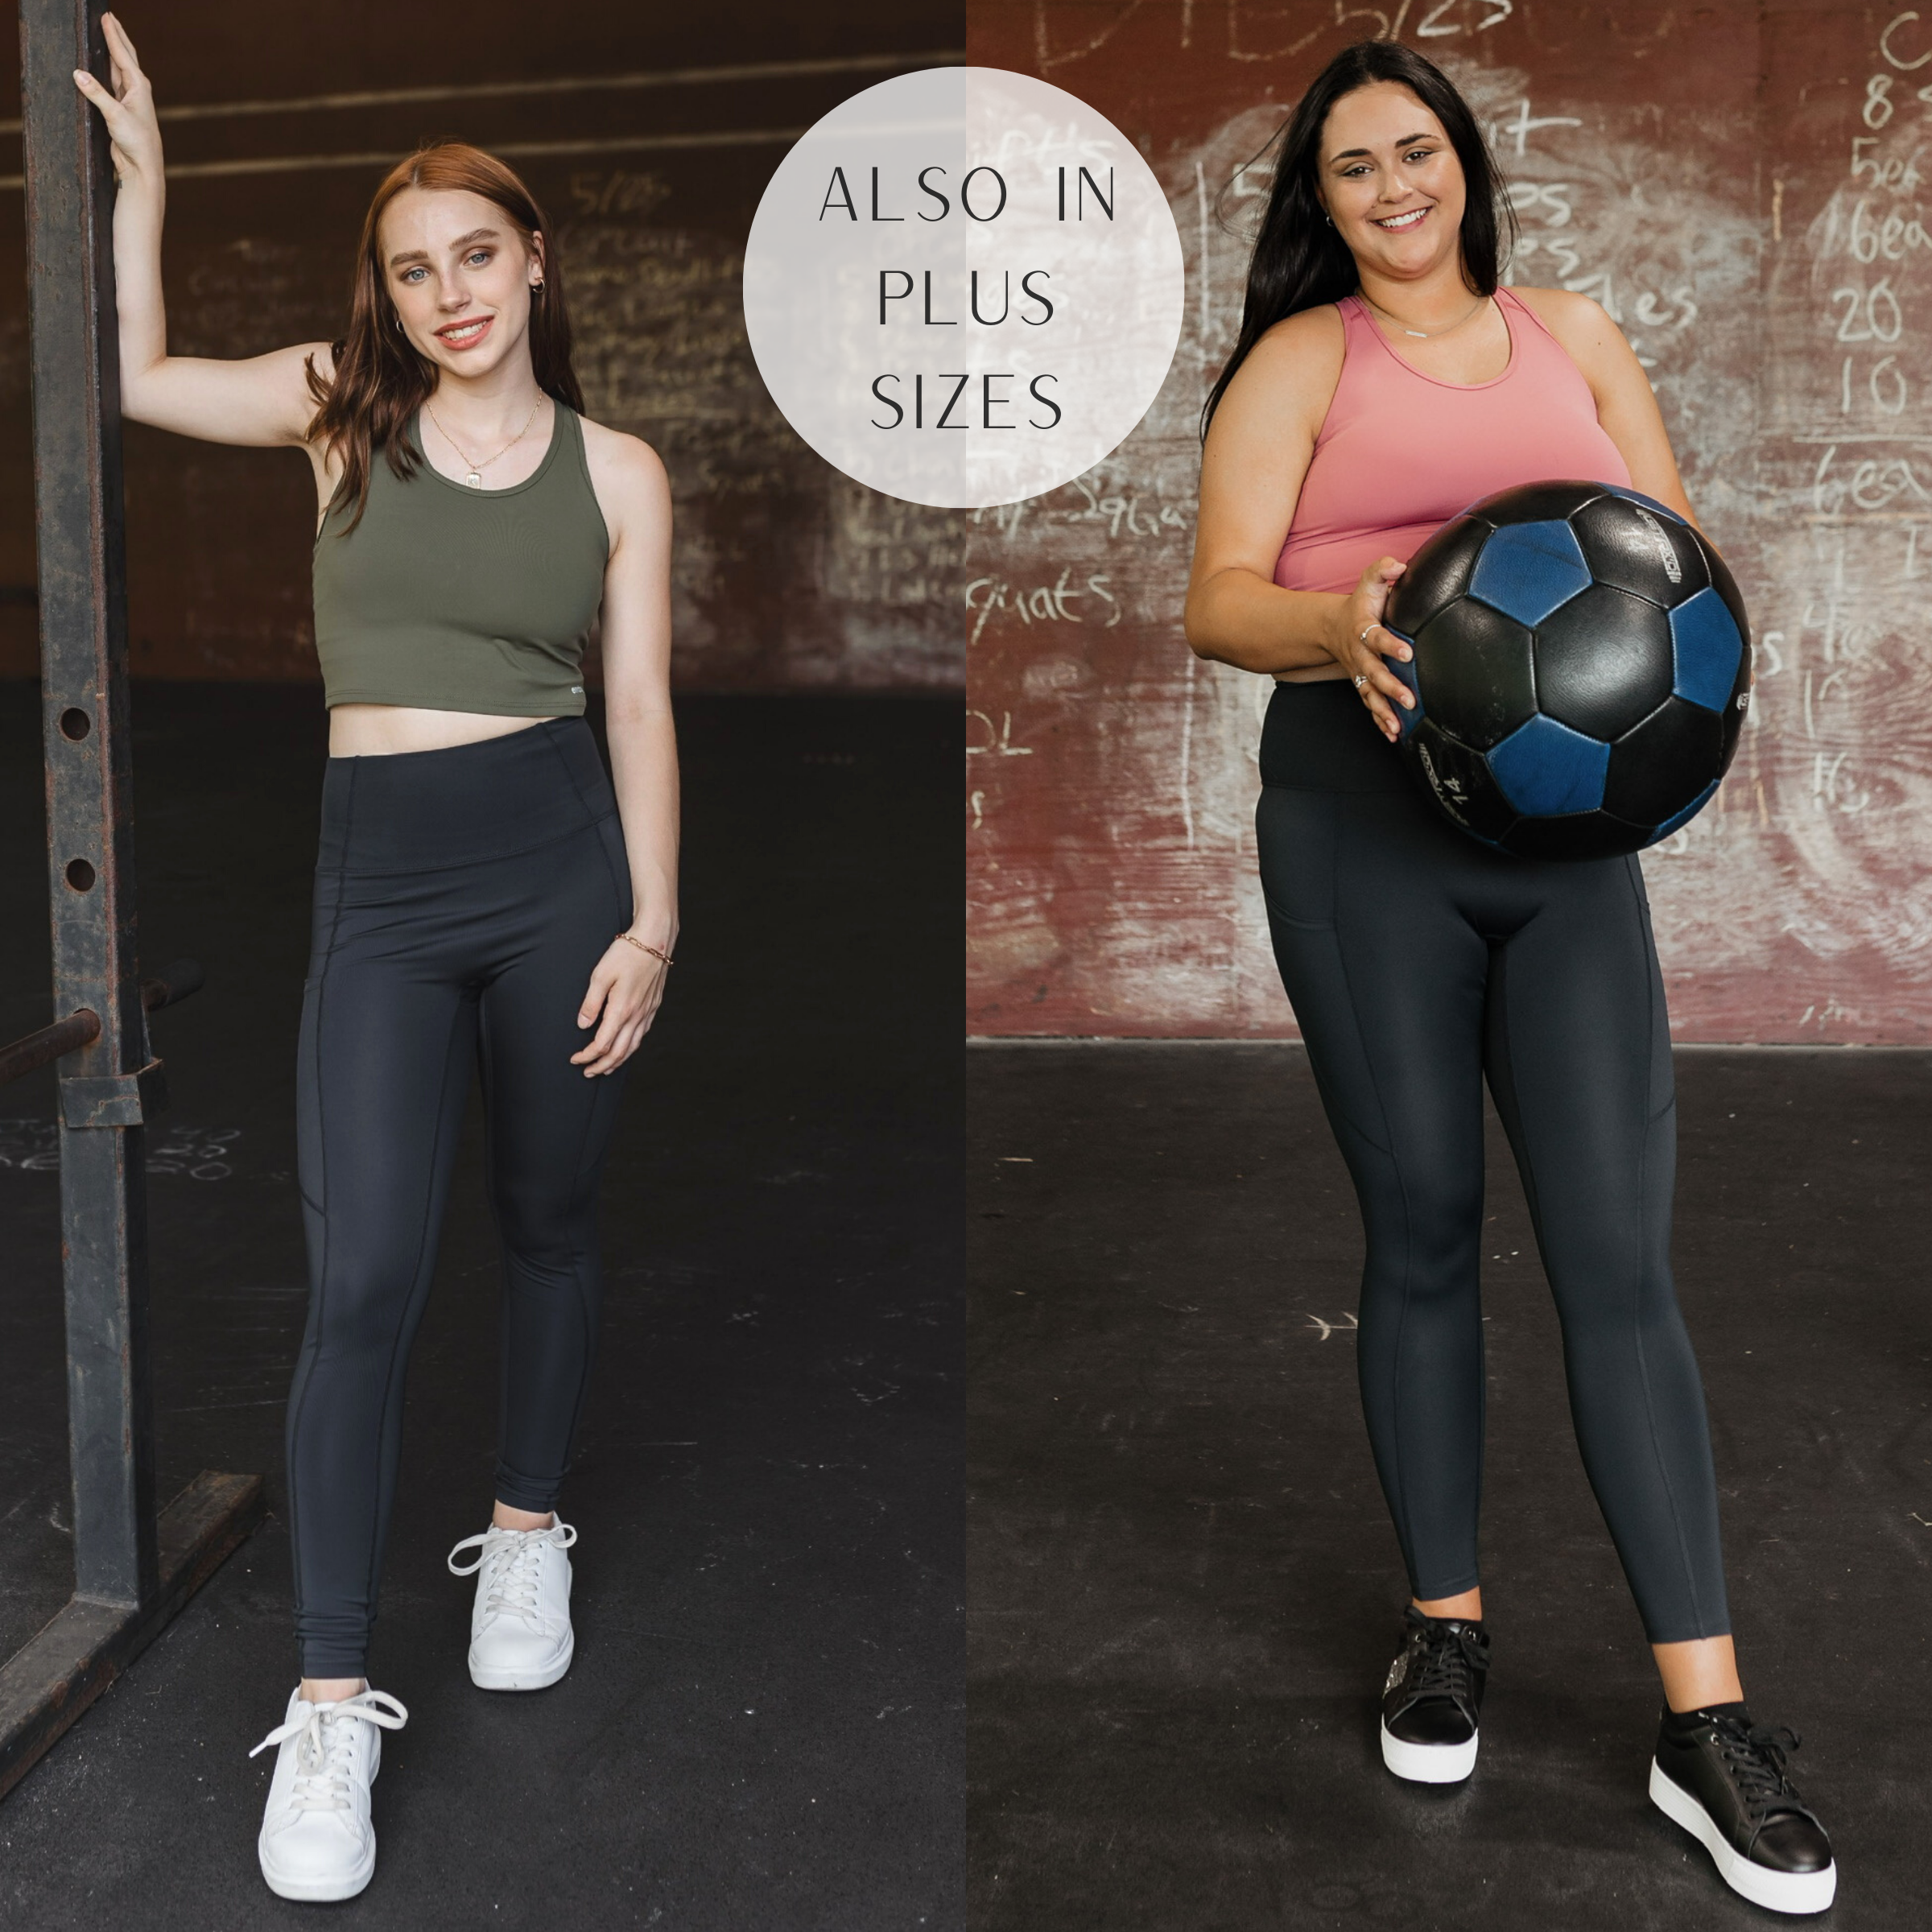 Models are wearing a pair of black leggings with pockets on the side. Plus size model has it paired with black sneakers and a pink tank top. Size small model, pictured from the waist down, has it paired with white sneakers.